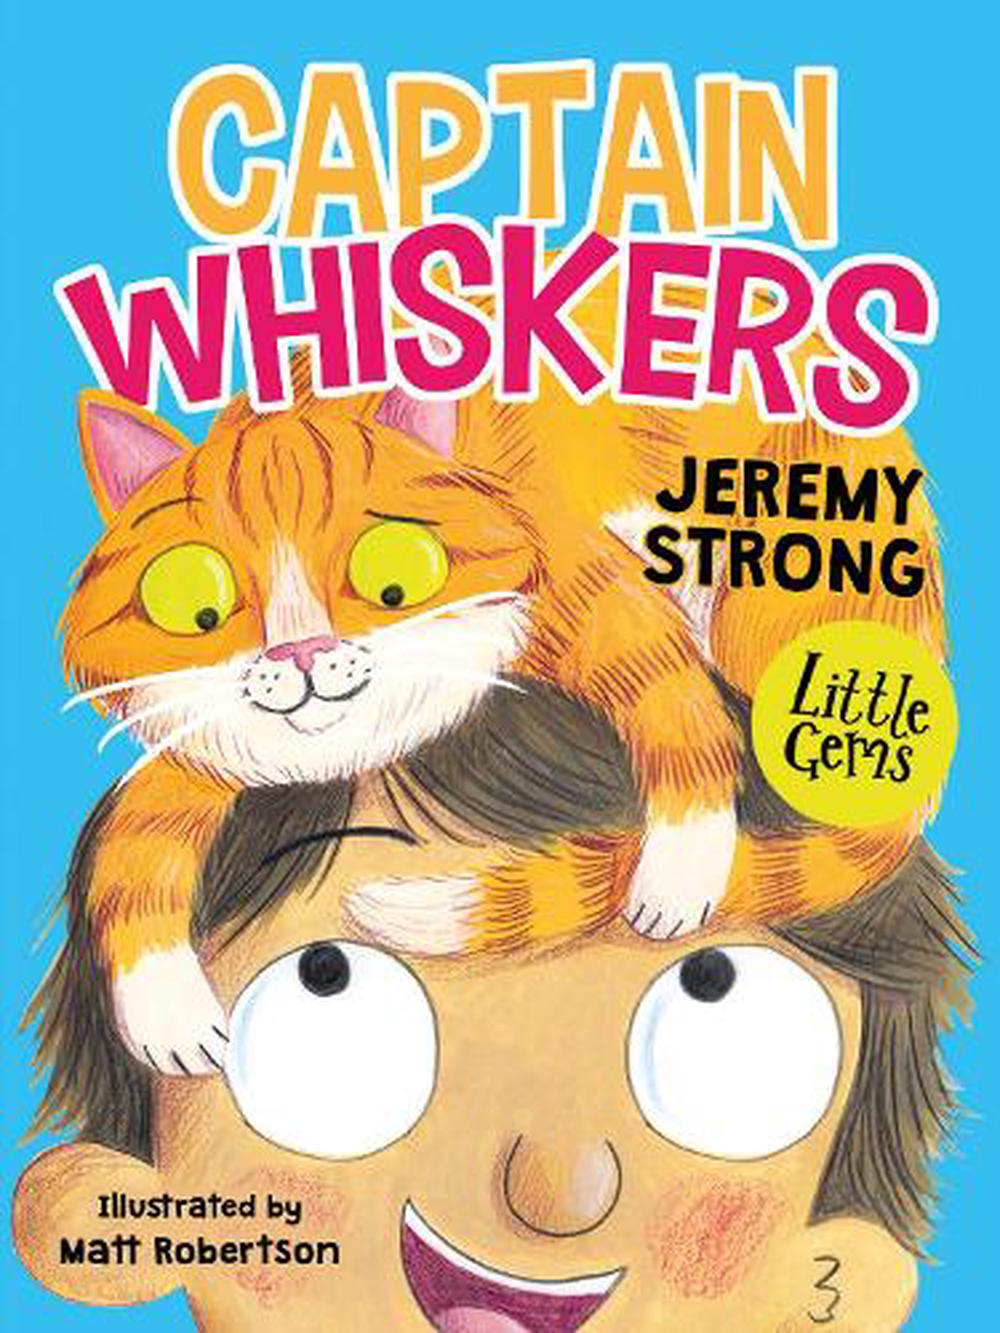 Captain Whiskers by Jeremy Strong (English) Paperback Book Free ...